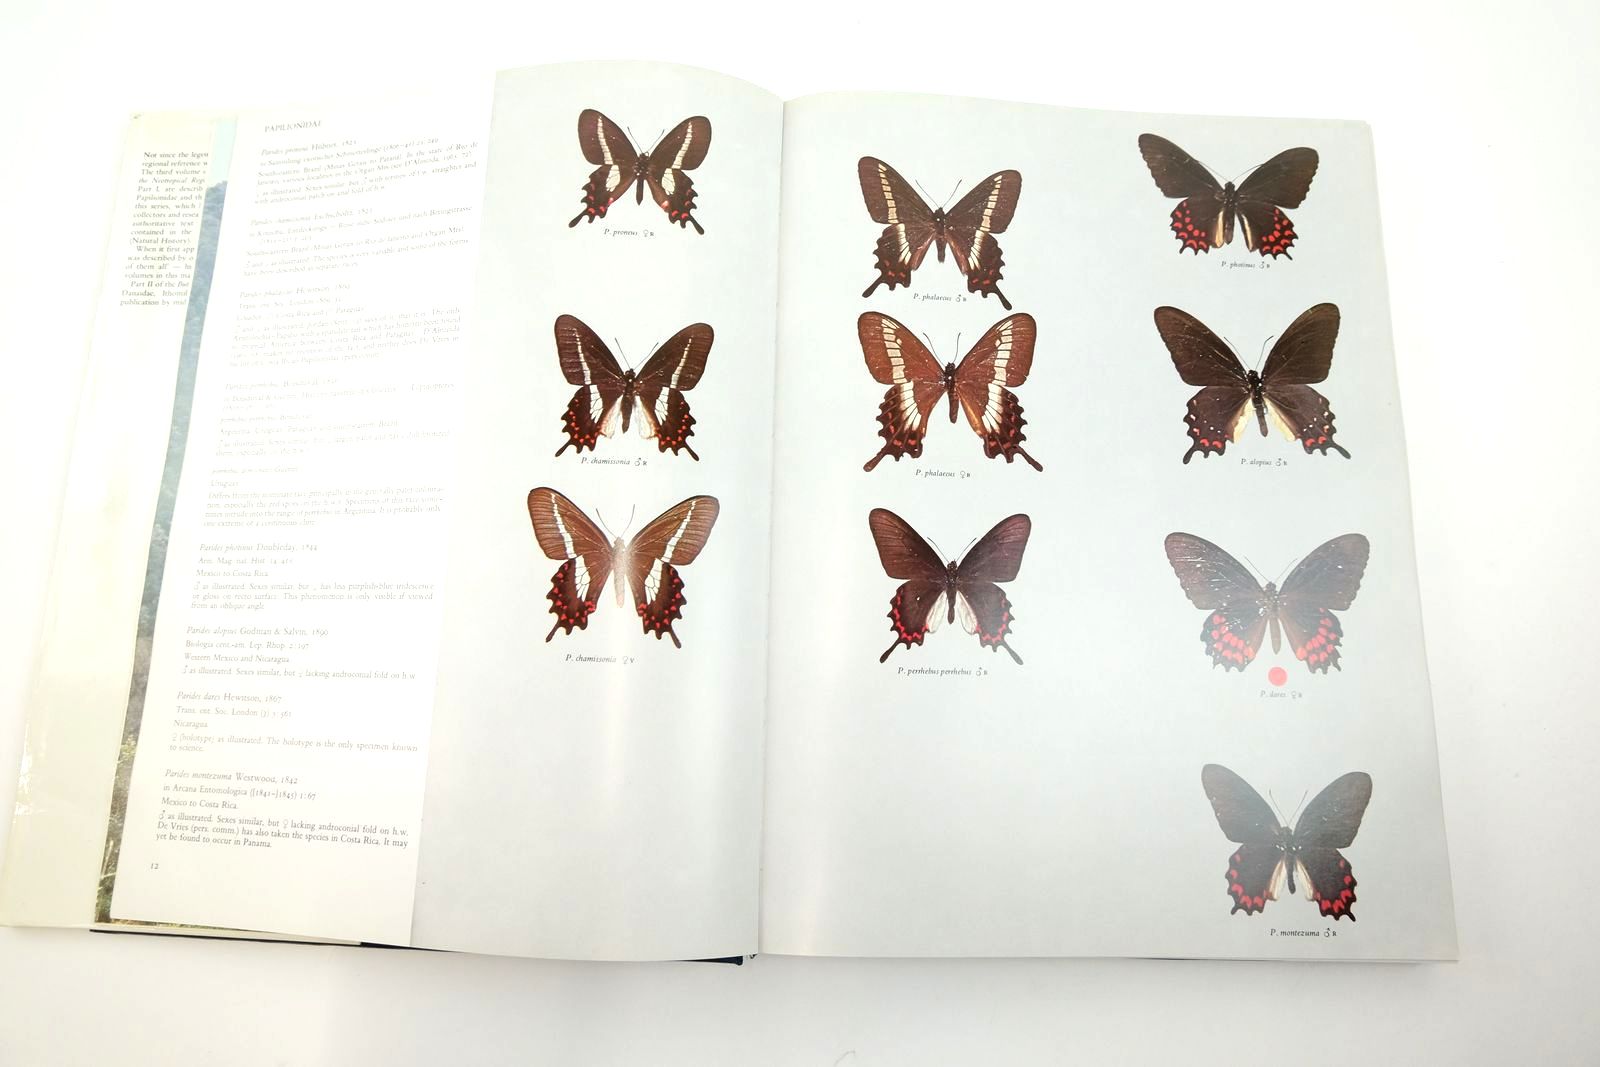 Photo of BUTTERFLIES OF THE NEOTROPICAL REGION PART 1 written by D'Abrera, Bernard published by Lansdowne (STOCK CODE: 2139832)  for sale by Stella & Rose's Books